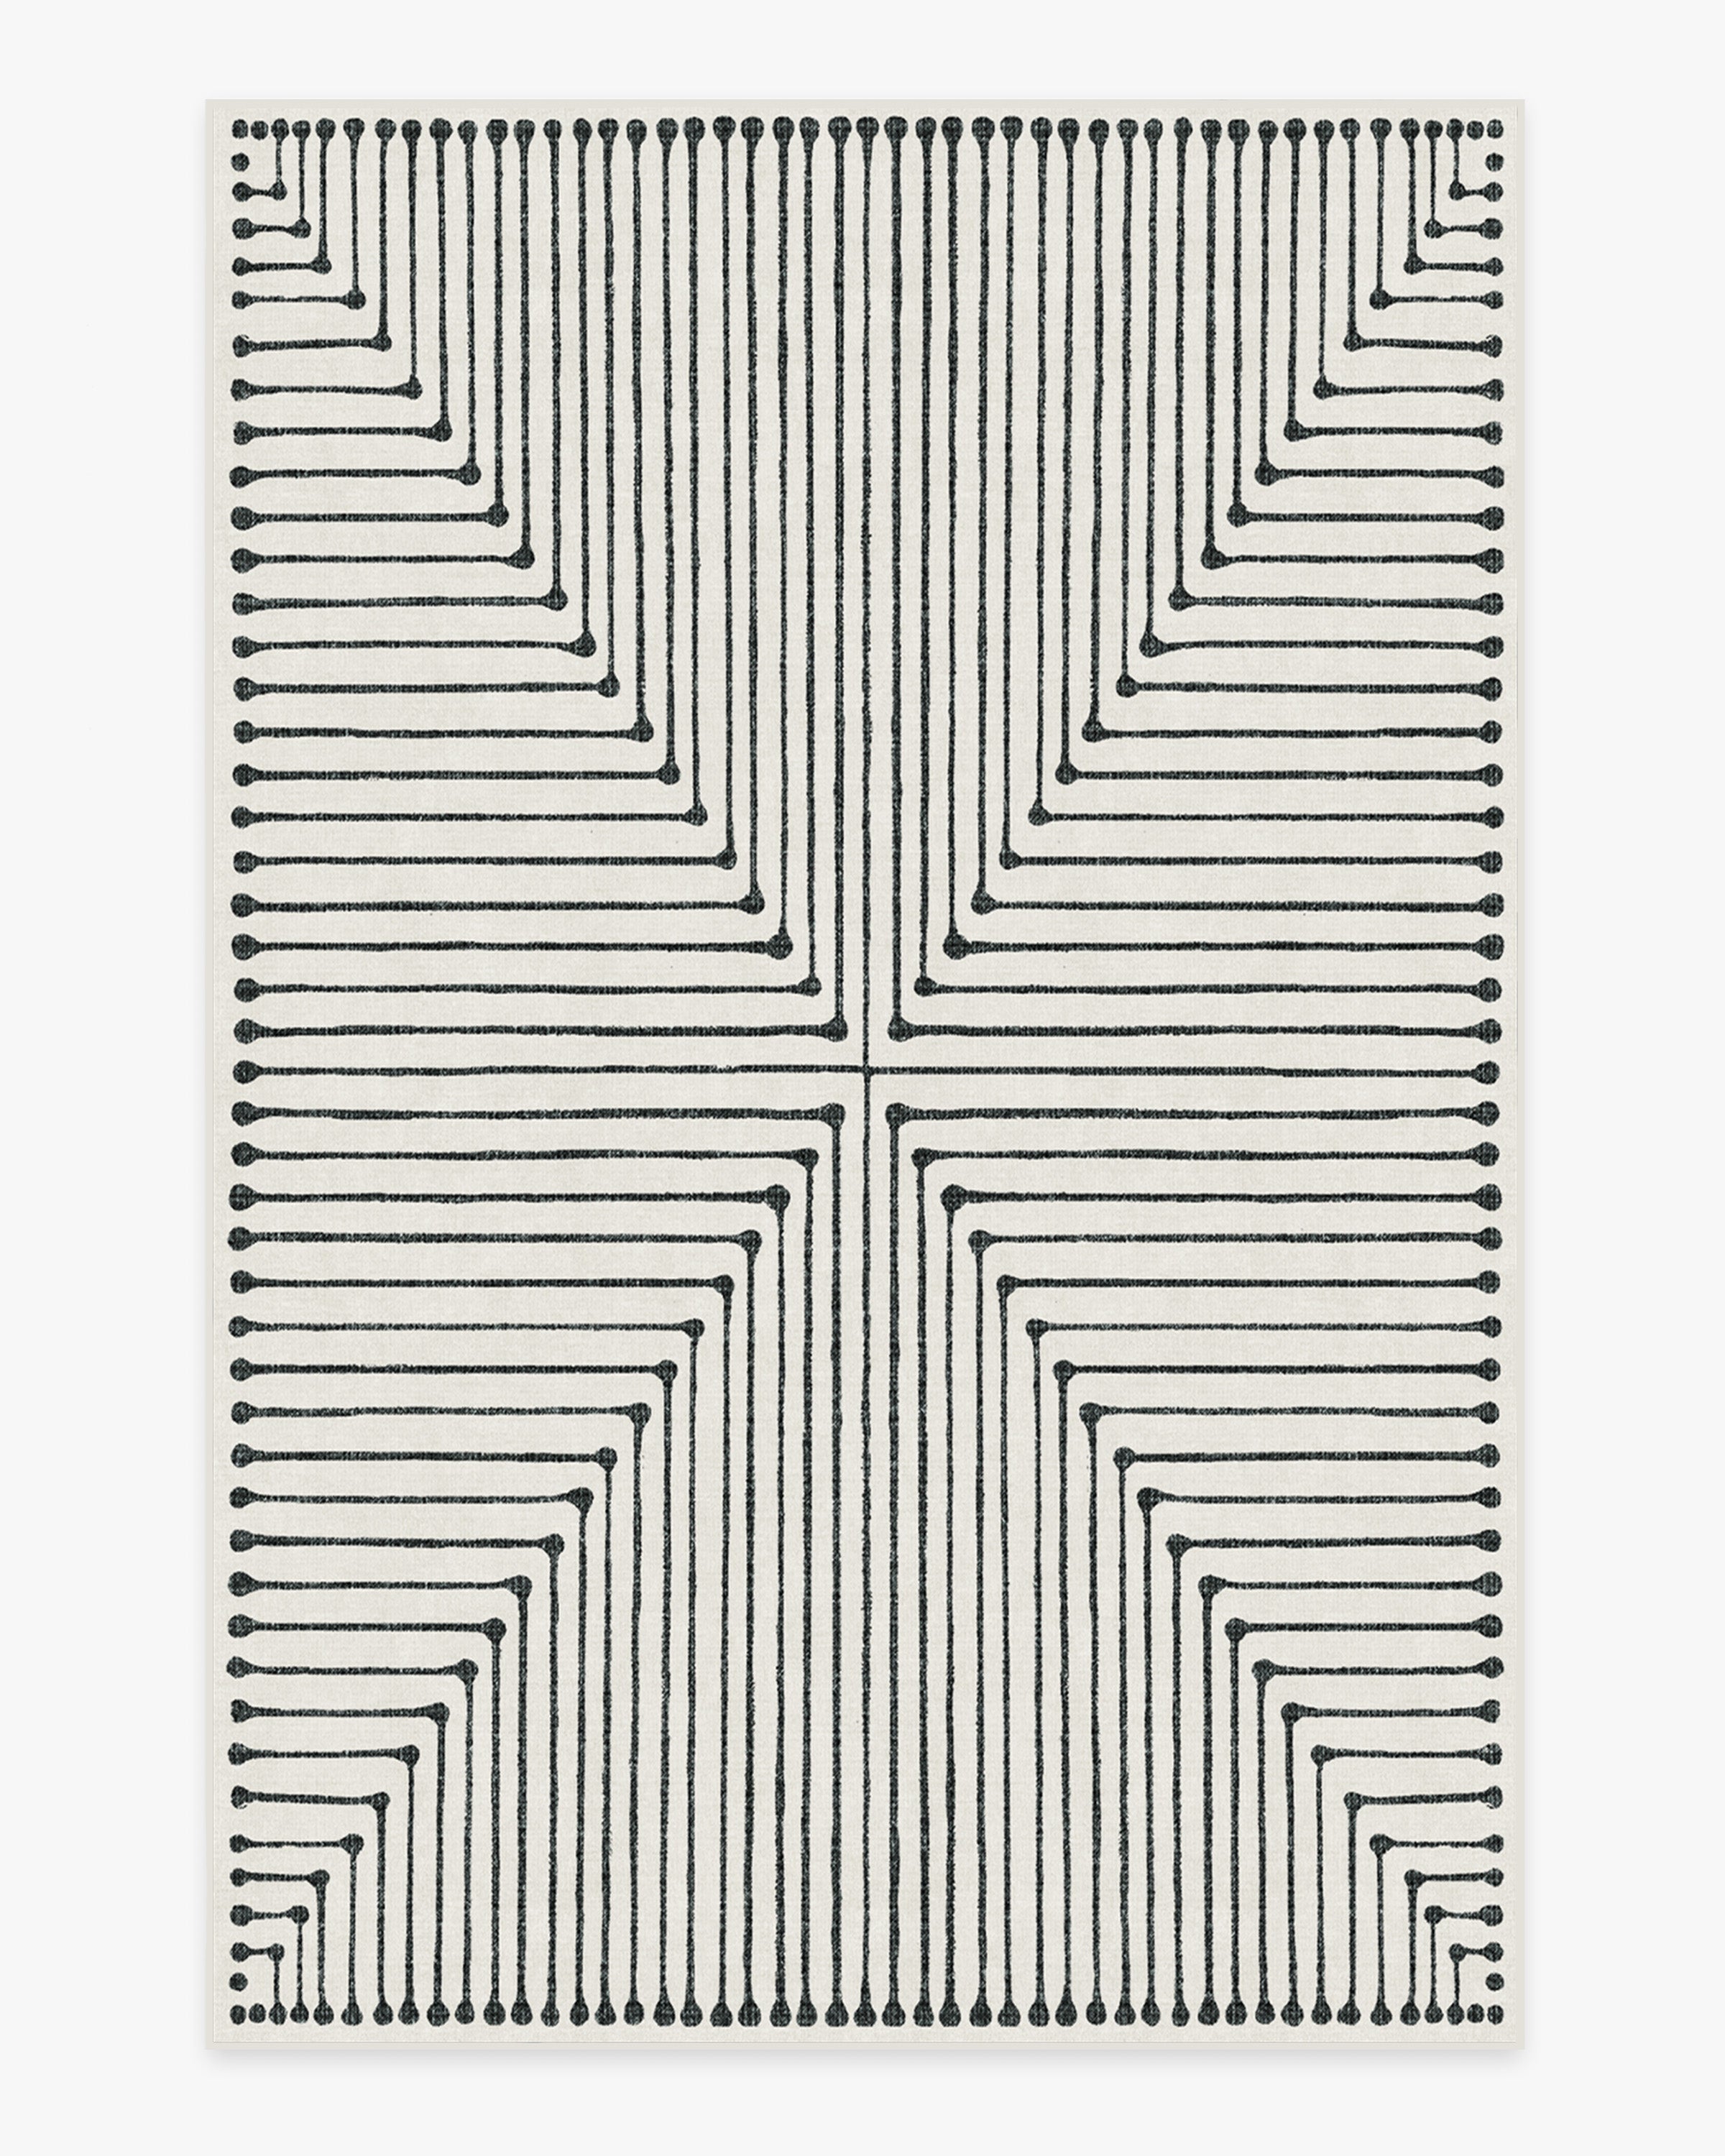 Check Out Jonathan Adler's Latest Line of Happy Rugs for Ruggable